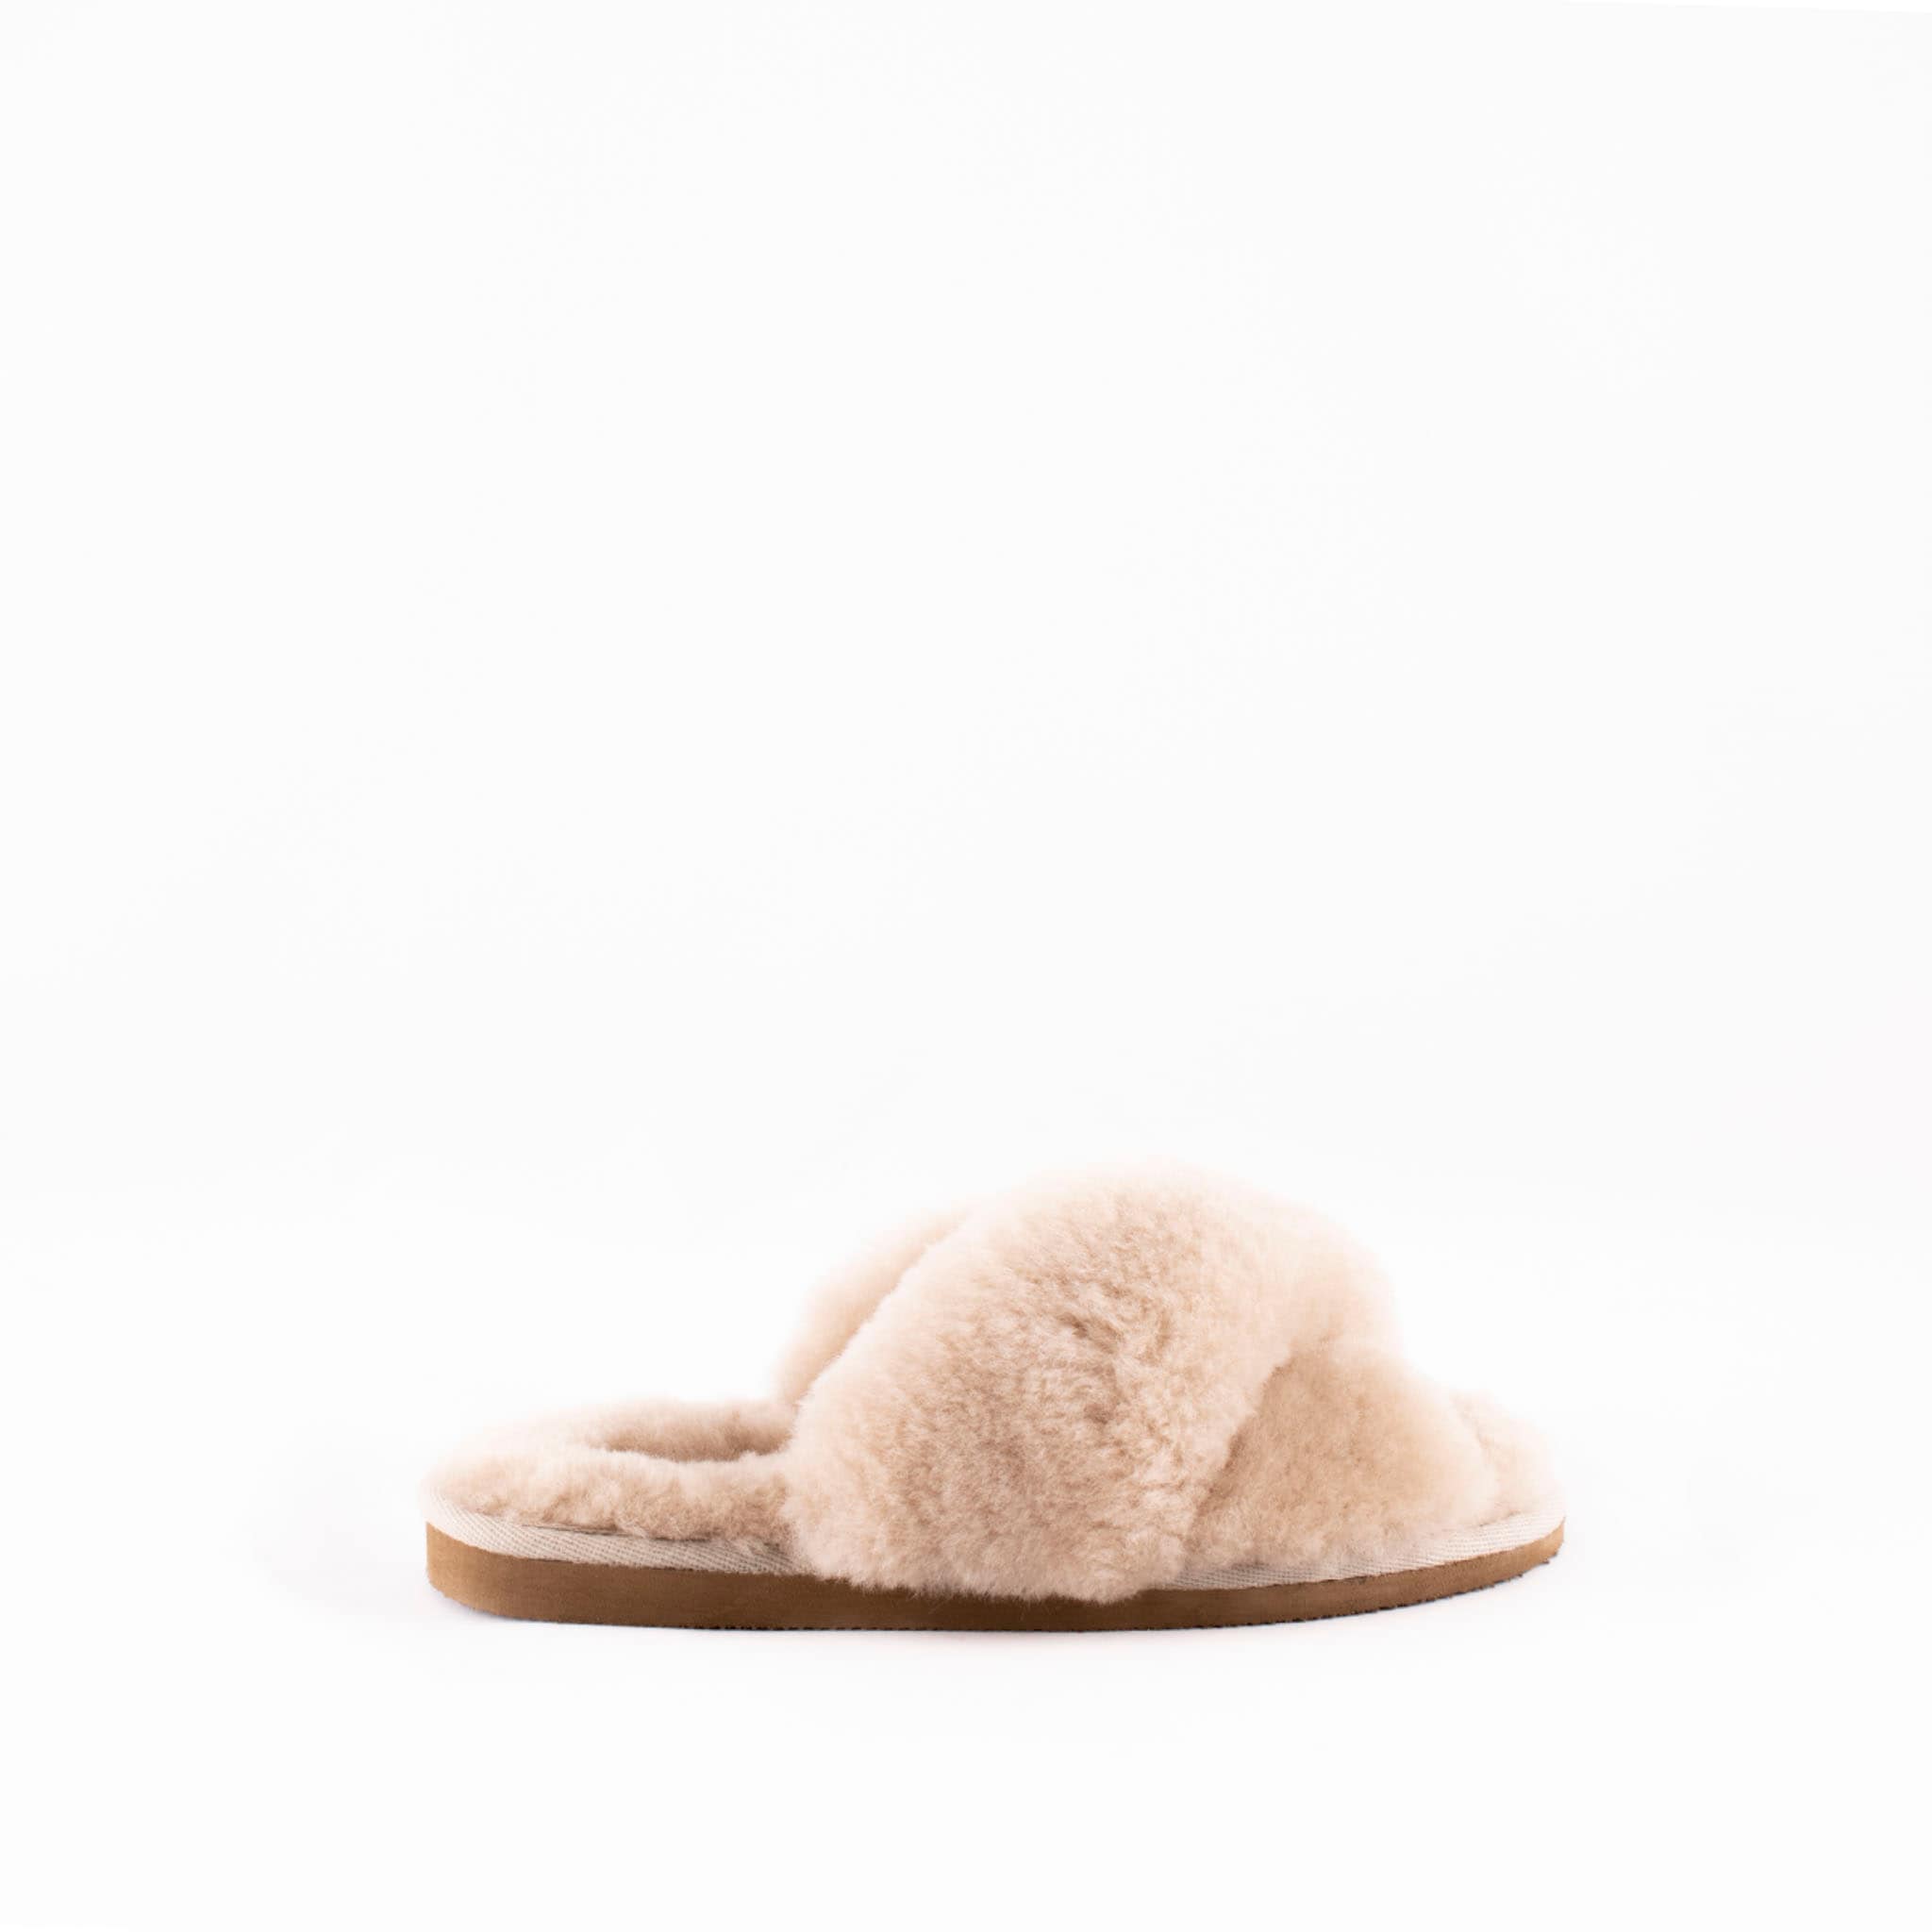 Shepherd® of Sweden Official | Slippers & Shoes |Sheepskin products - Shepherd of